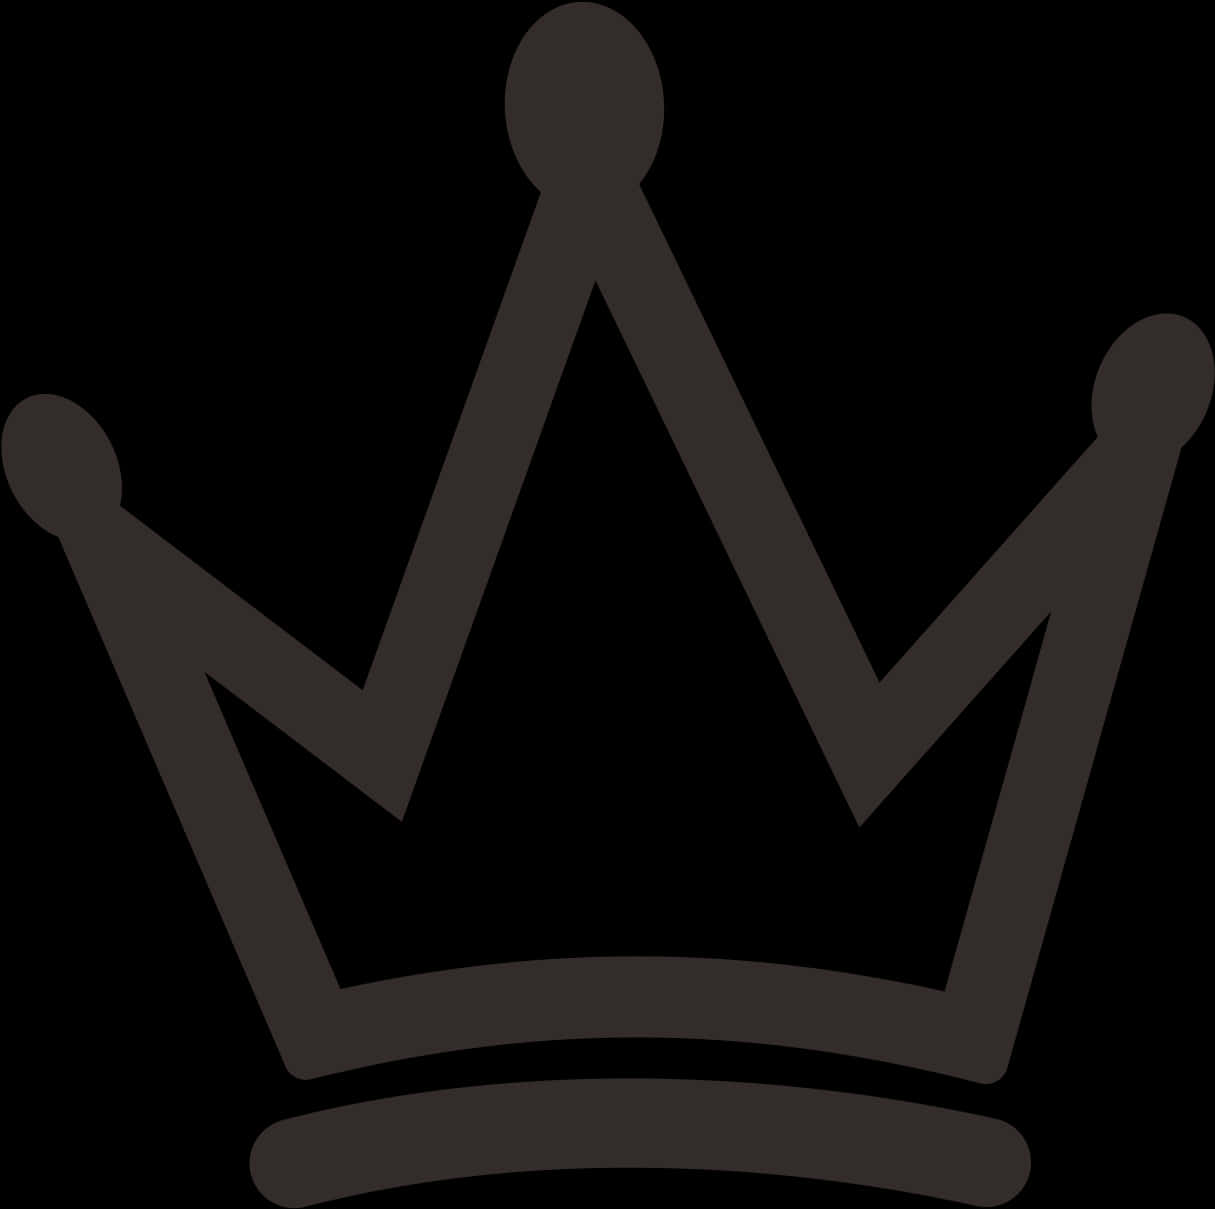 A Black Crown With Pointy Edges